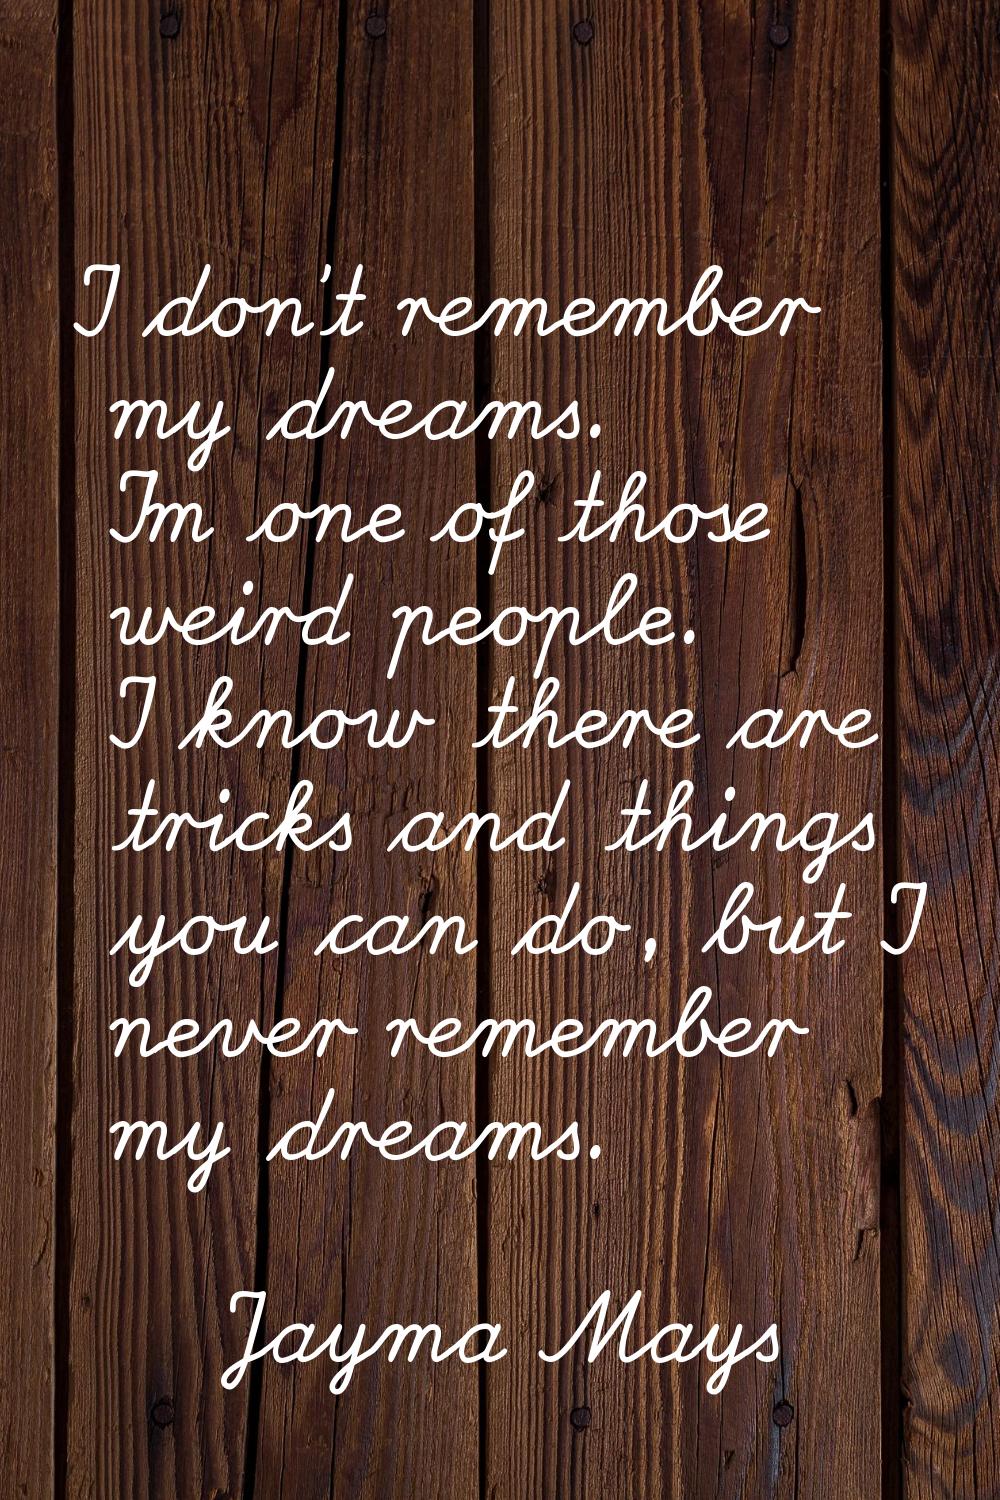 I don't remember my dreams. I'm one of those weird people. I know there are tricks and things you c